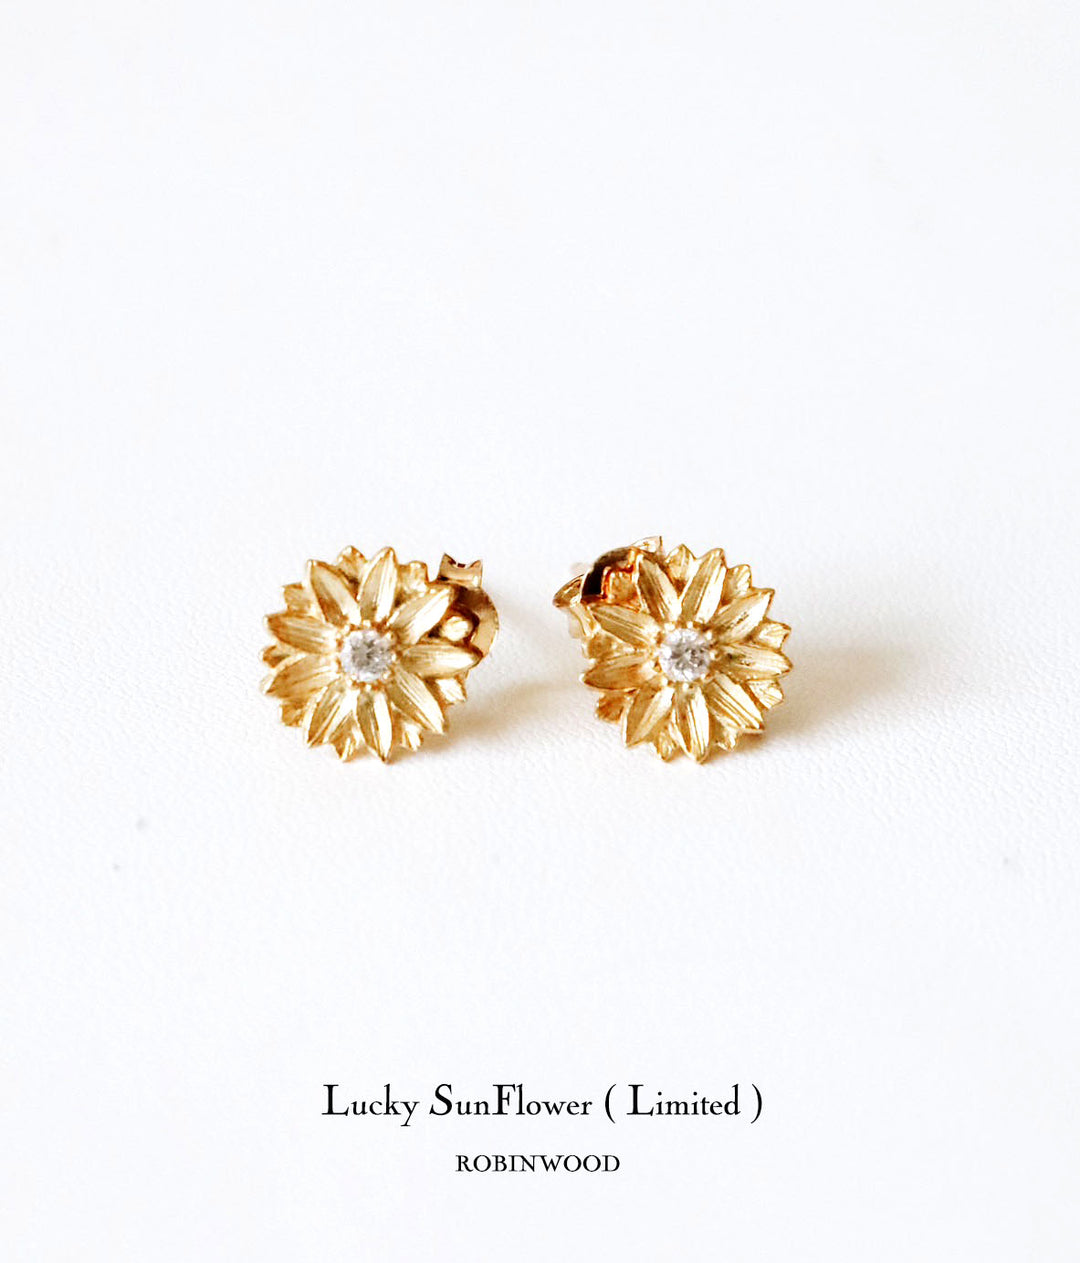 Limited Sun Flower Collection's " Lucky Sun Flower, Signature Earrings  By Robinwood